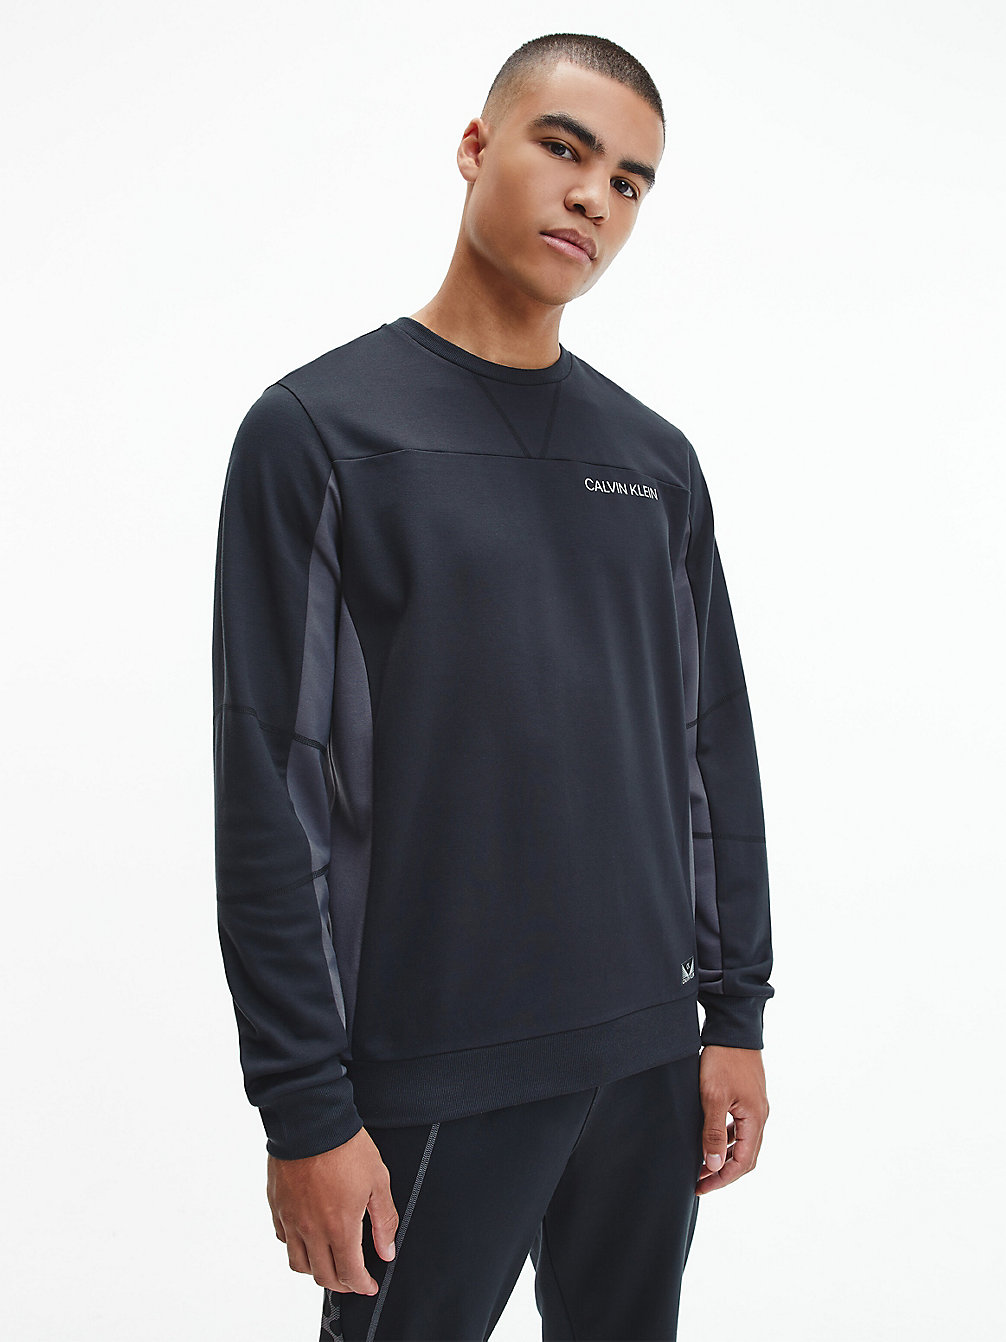 Sweat Relaxed Comfort Stretch > CK BLACK/ PERISCOPE/ STONE GREY > undefined hommes > Calvin Klein